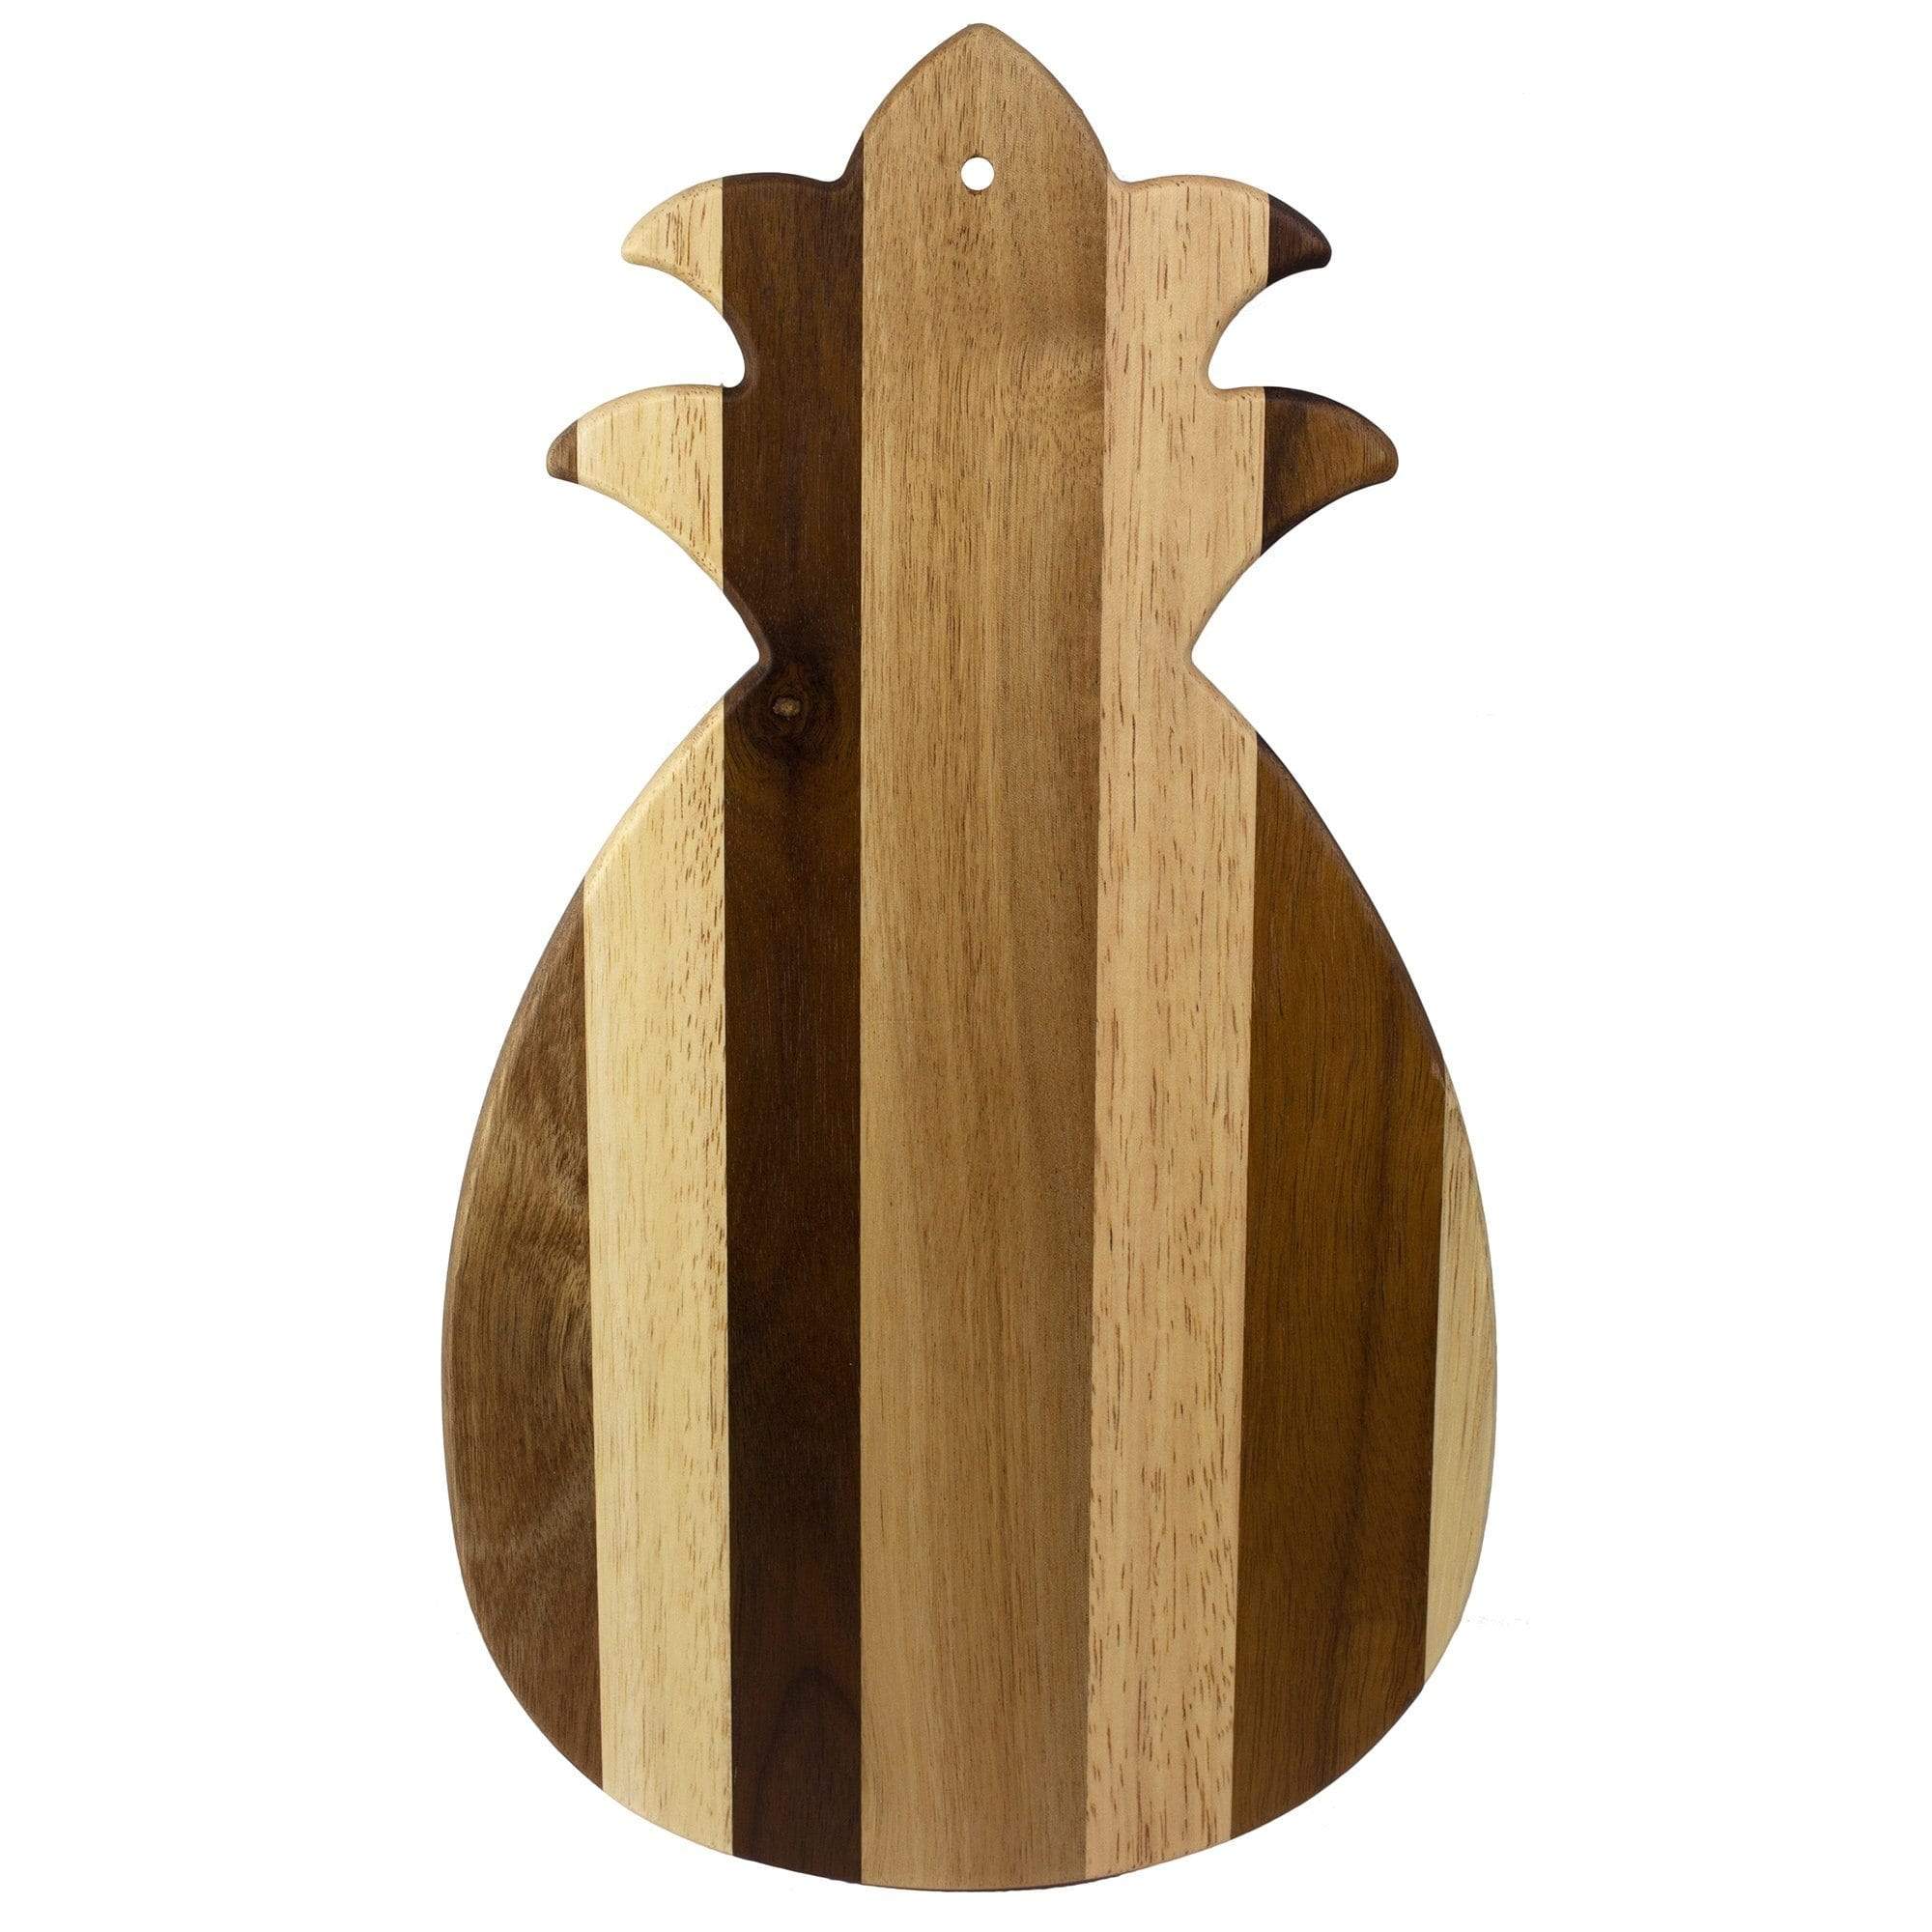 Artisan Crafted Wood Cutting/Serving Boards - Round by Rockledge